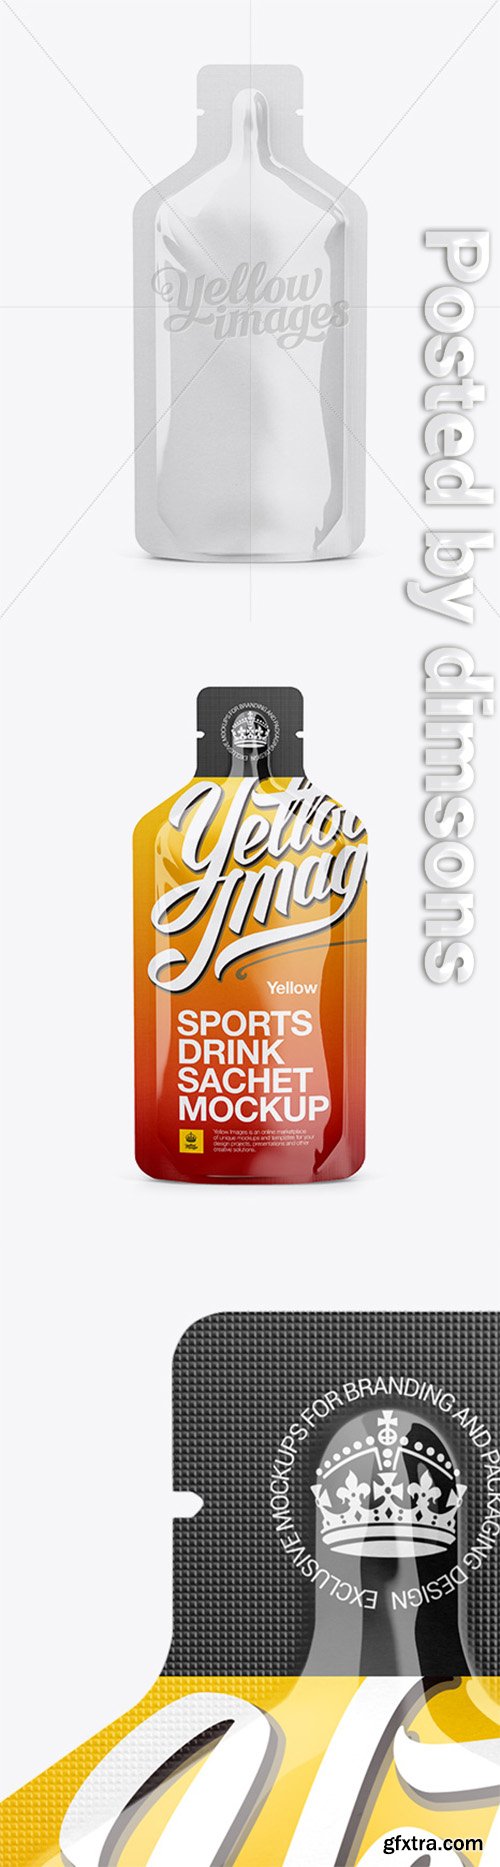 Glossy Sports Energy Drink Sachet Mockup - Front View 14355